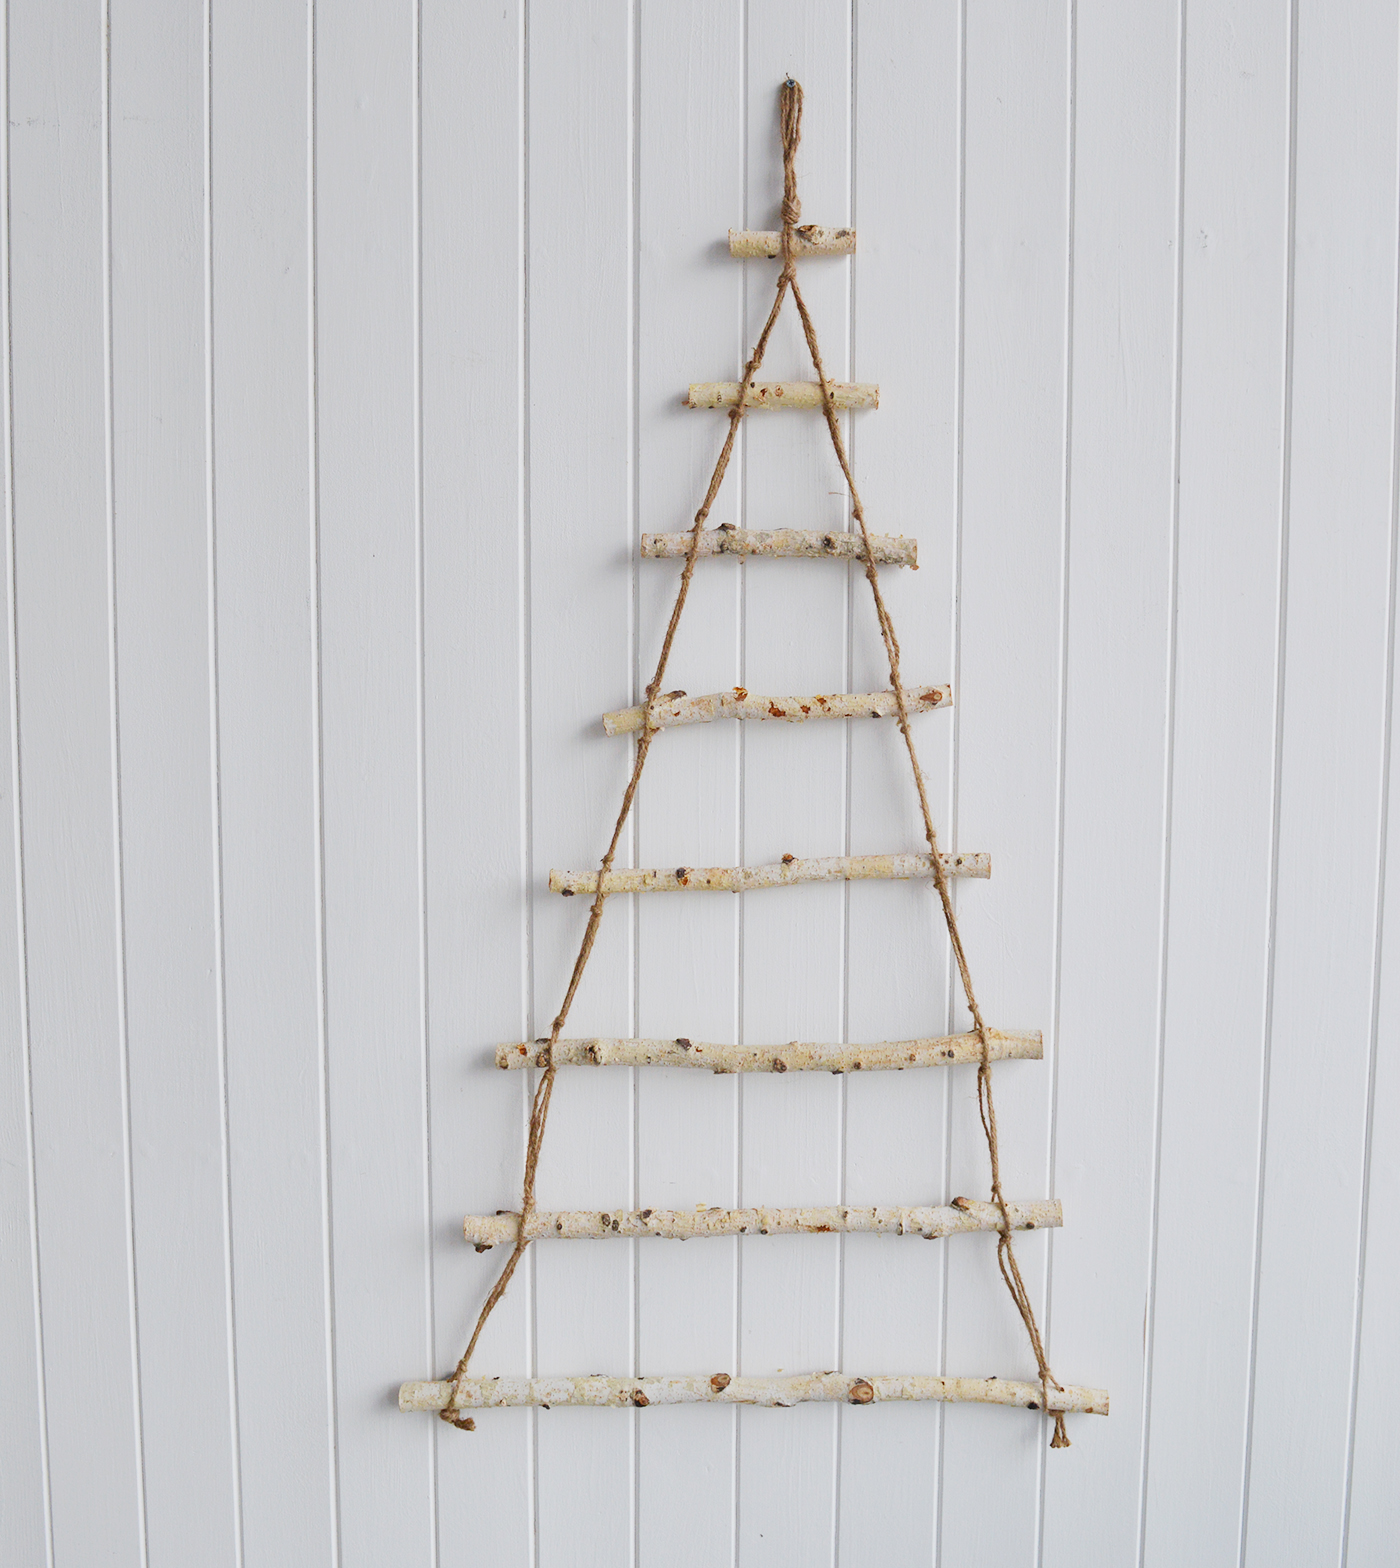 New England style Christmas Decor for cottage, farmhouse, coastal, country and city homes and interiors. Birch Christmas Tree - New England style Christmas Decor